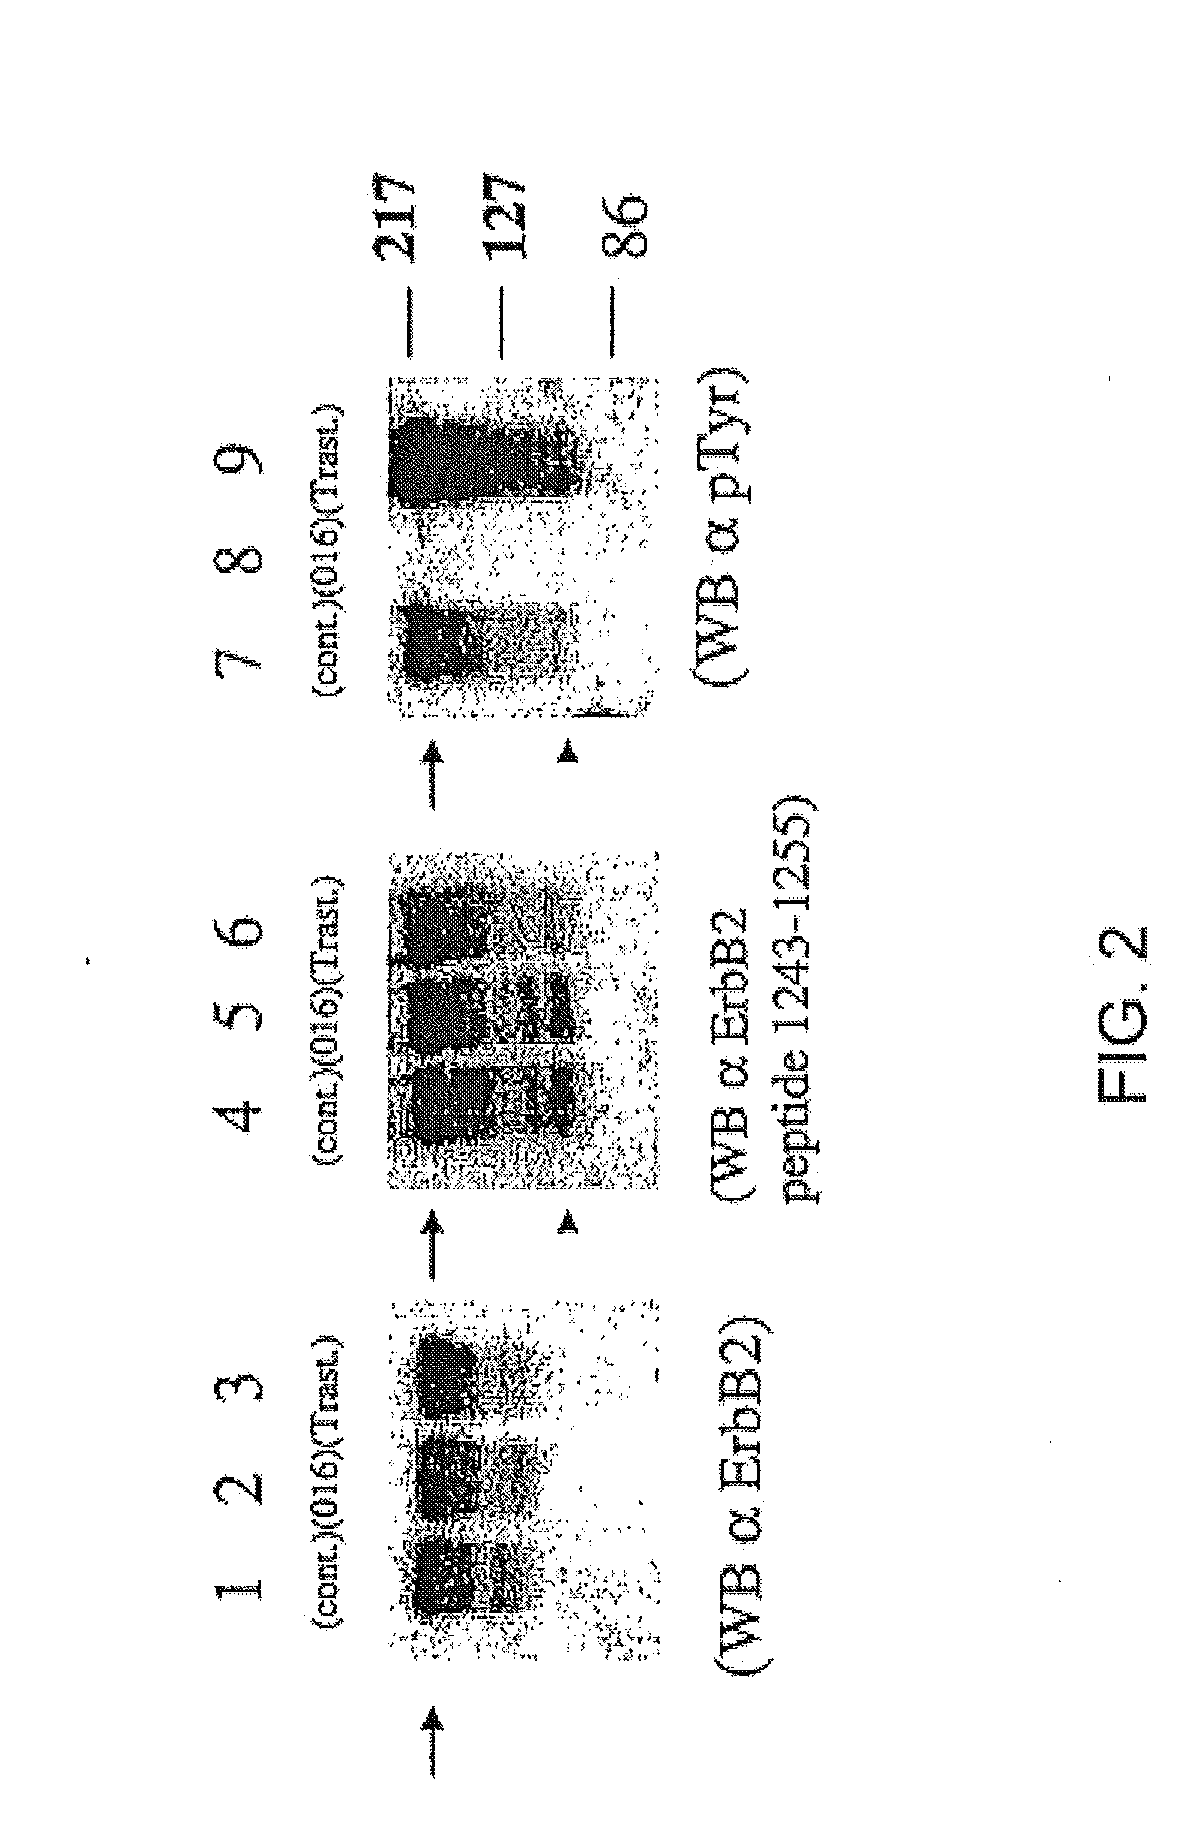 Treatment of Cancers Expressing p95 ErbB2